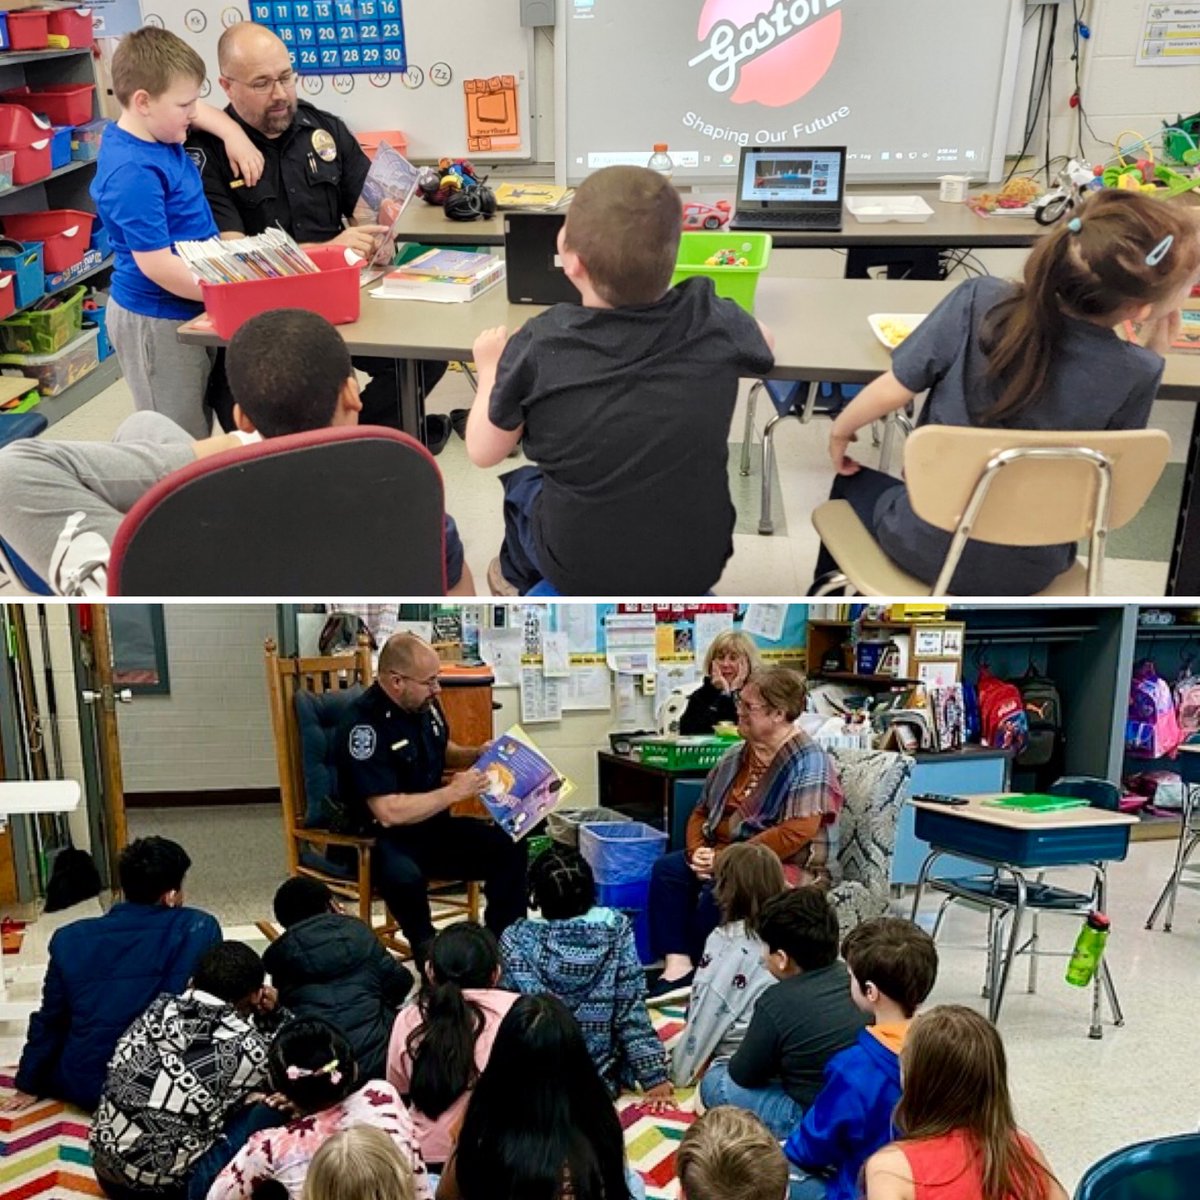 We are wrapping up Read Across America week with LT. Brian Atkins reading to students at Gardner Park Elementary School in Gastonia. Thank you for hosting us in schools this past week, we enjoy reading to the students! #Gastoniapolice